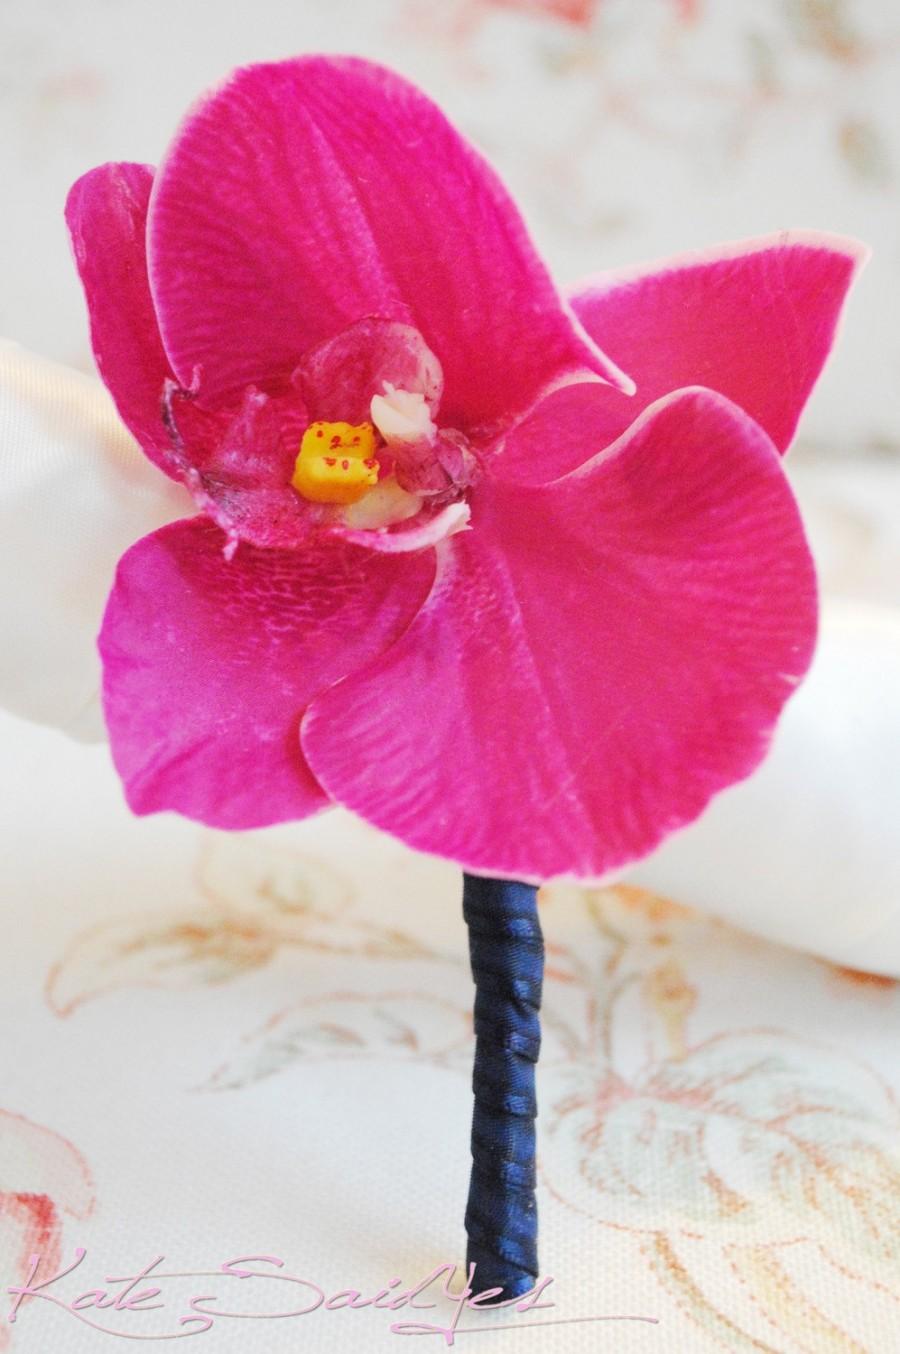 Wedding - Tropical Boutonniere, Orchid Boutonniere, Fuchsia and Navy Orchid Boutonniere, Beach Wedding Boutonniere